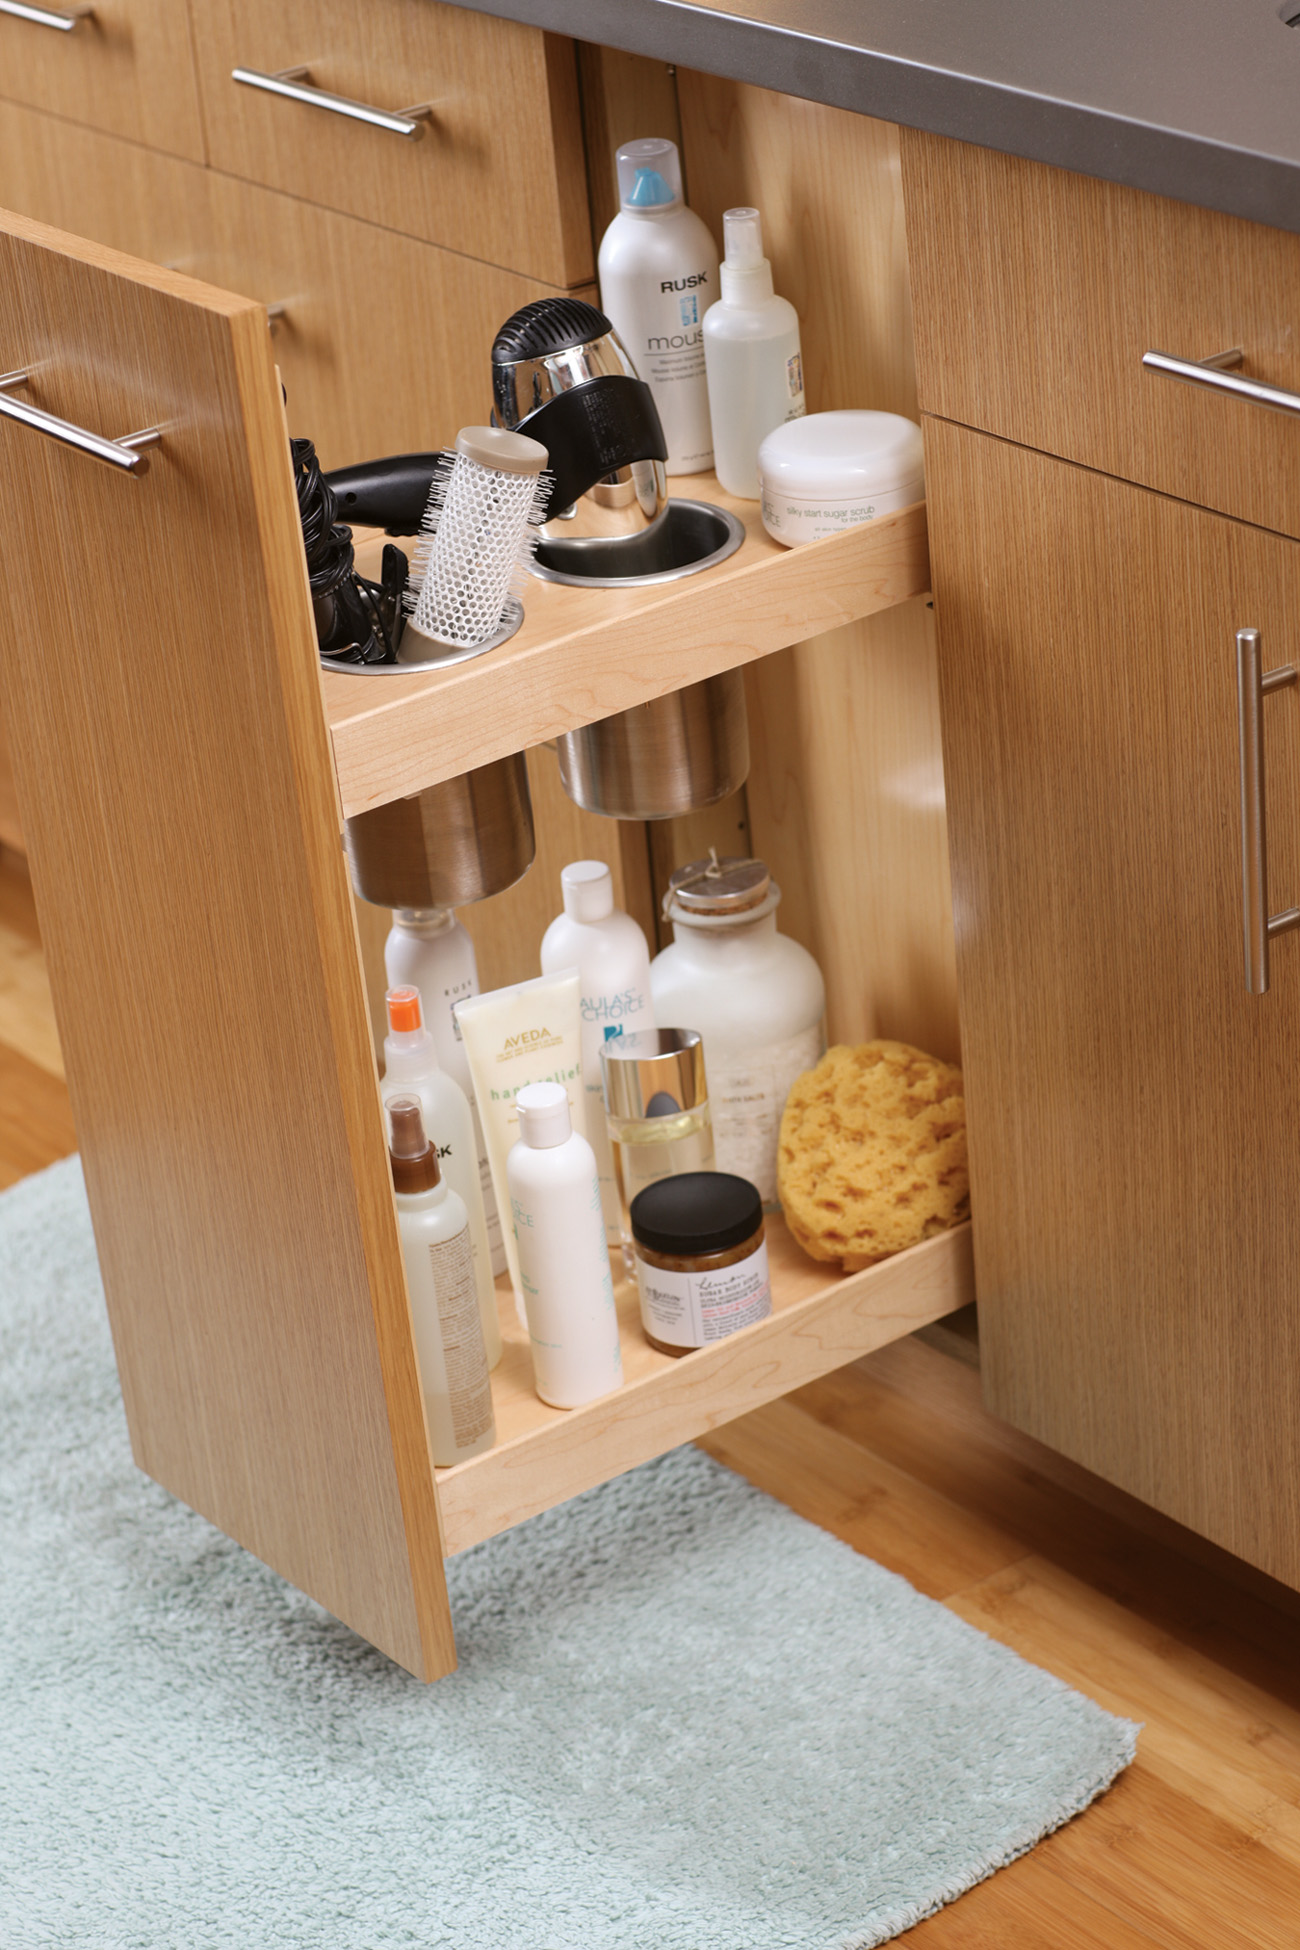 Organized pull-out storage for beauty products, curling irons, hair dryers, etc. in the bathroom with a Vanity Grooming Cabinet accessory.